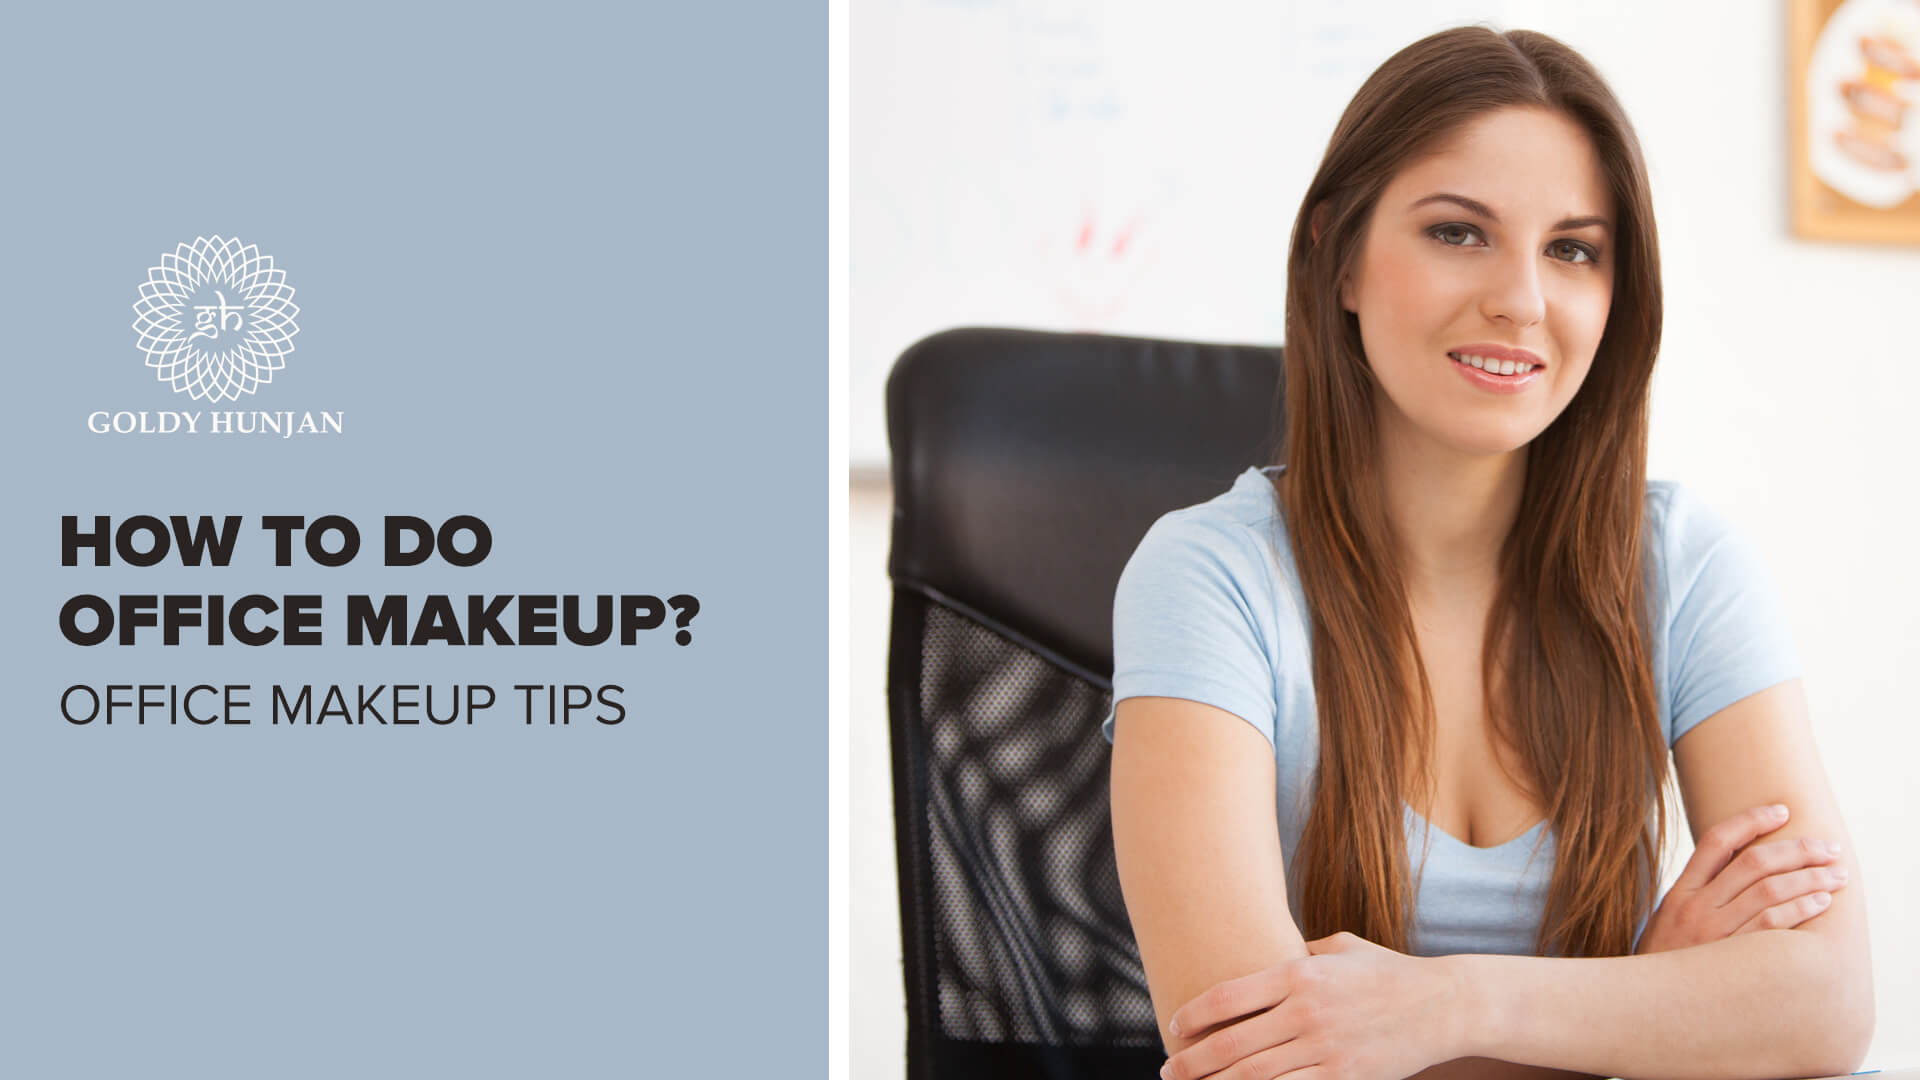 How to do office makeup